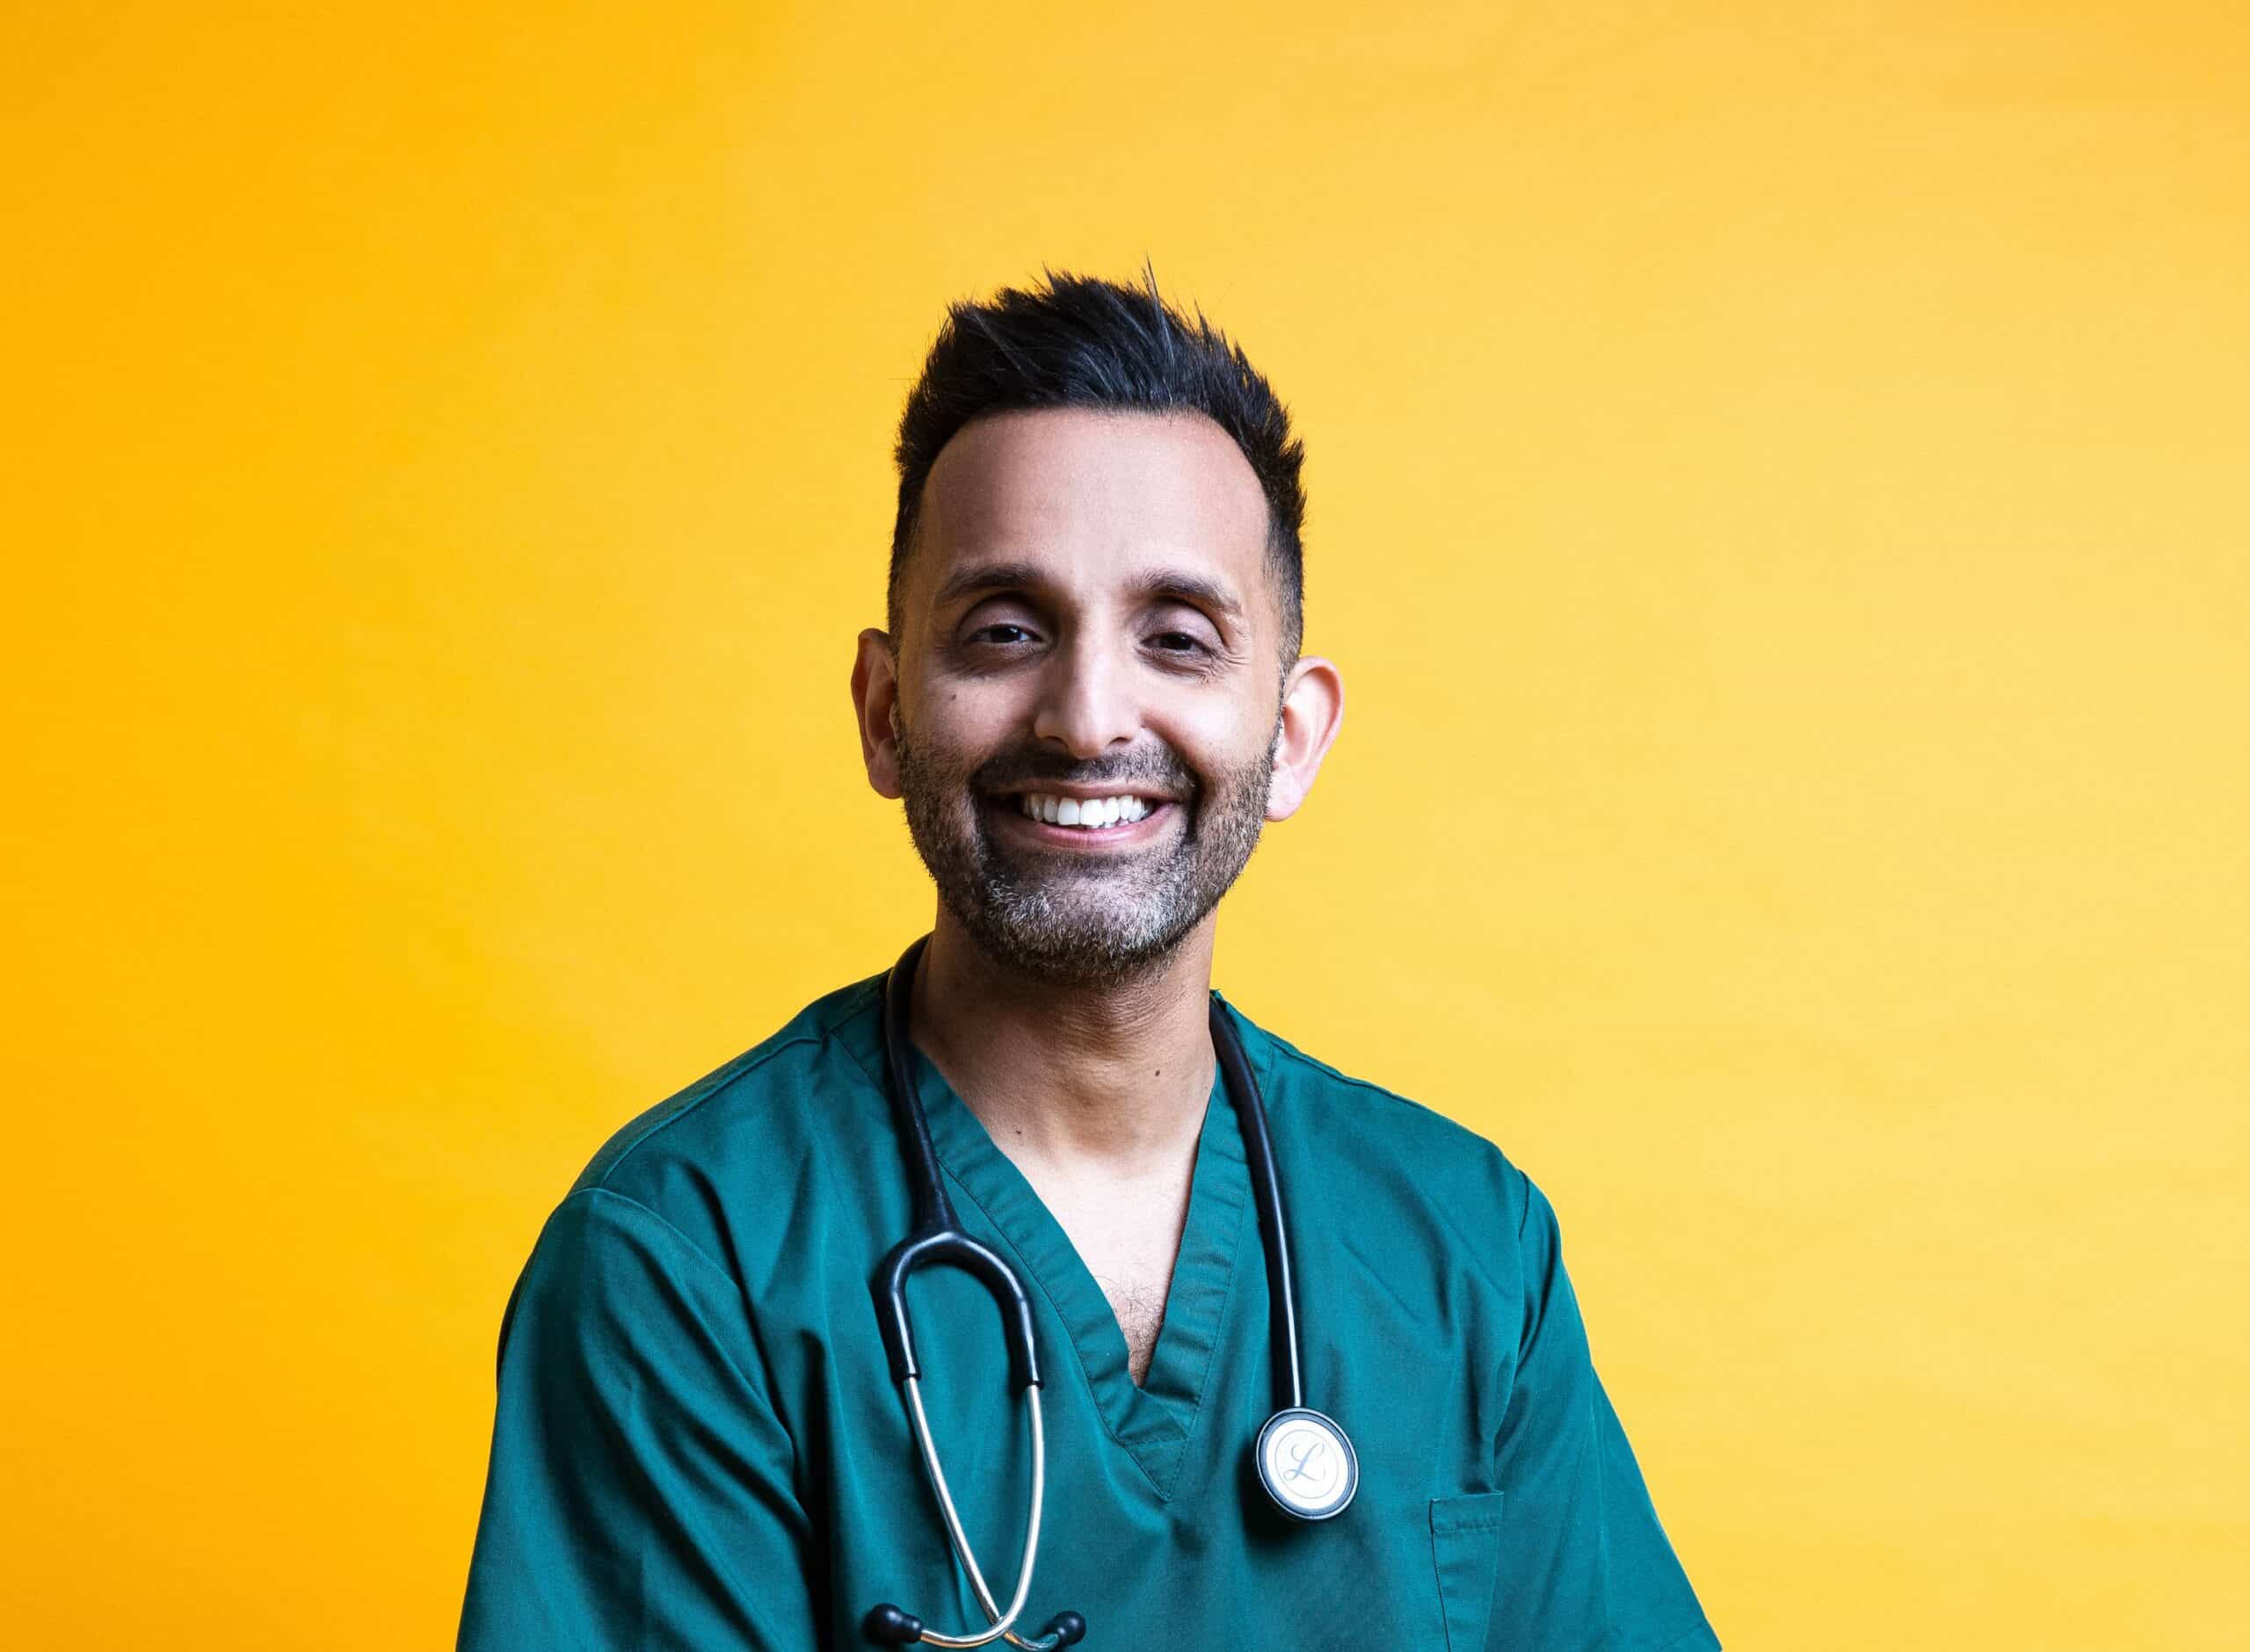 TV GP Dr Amir Khan: I’ve had patients refuse to see me because I’m an Asian doctor